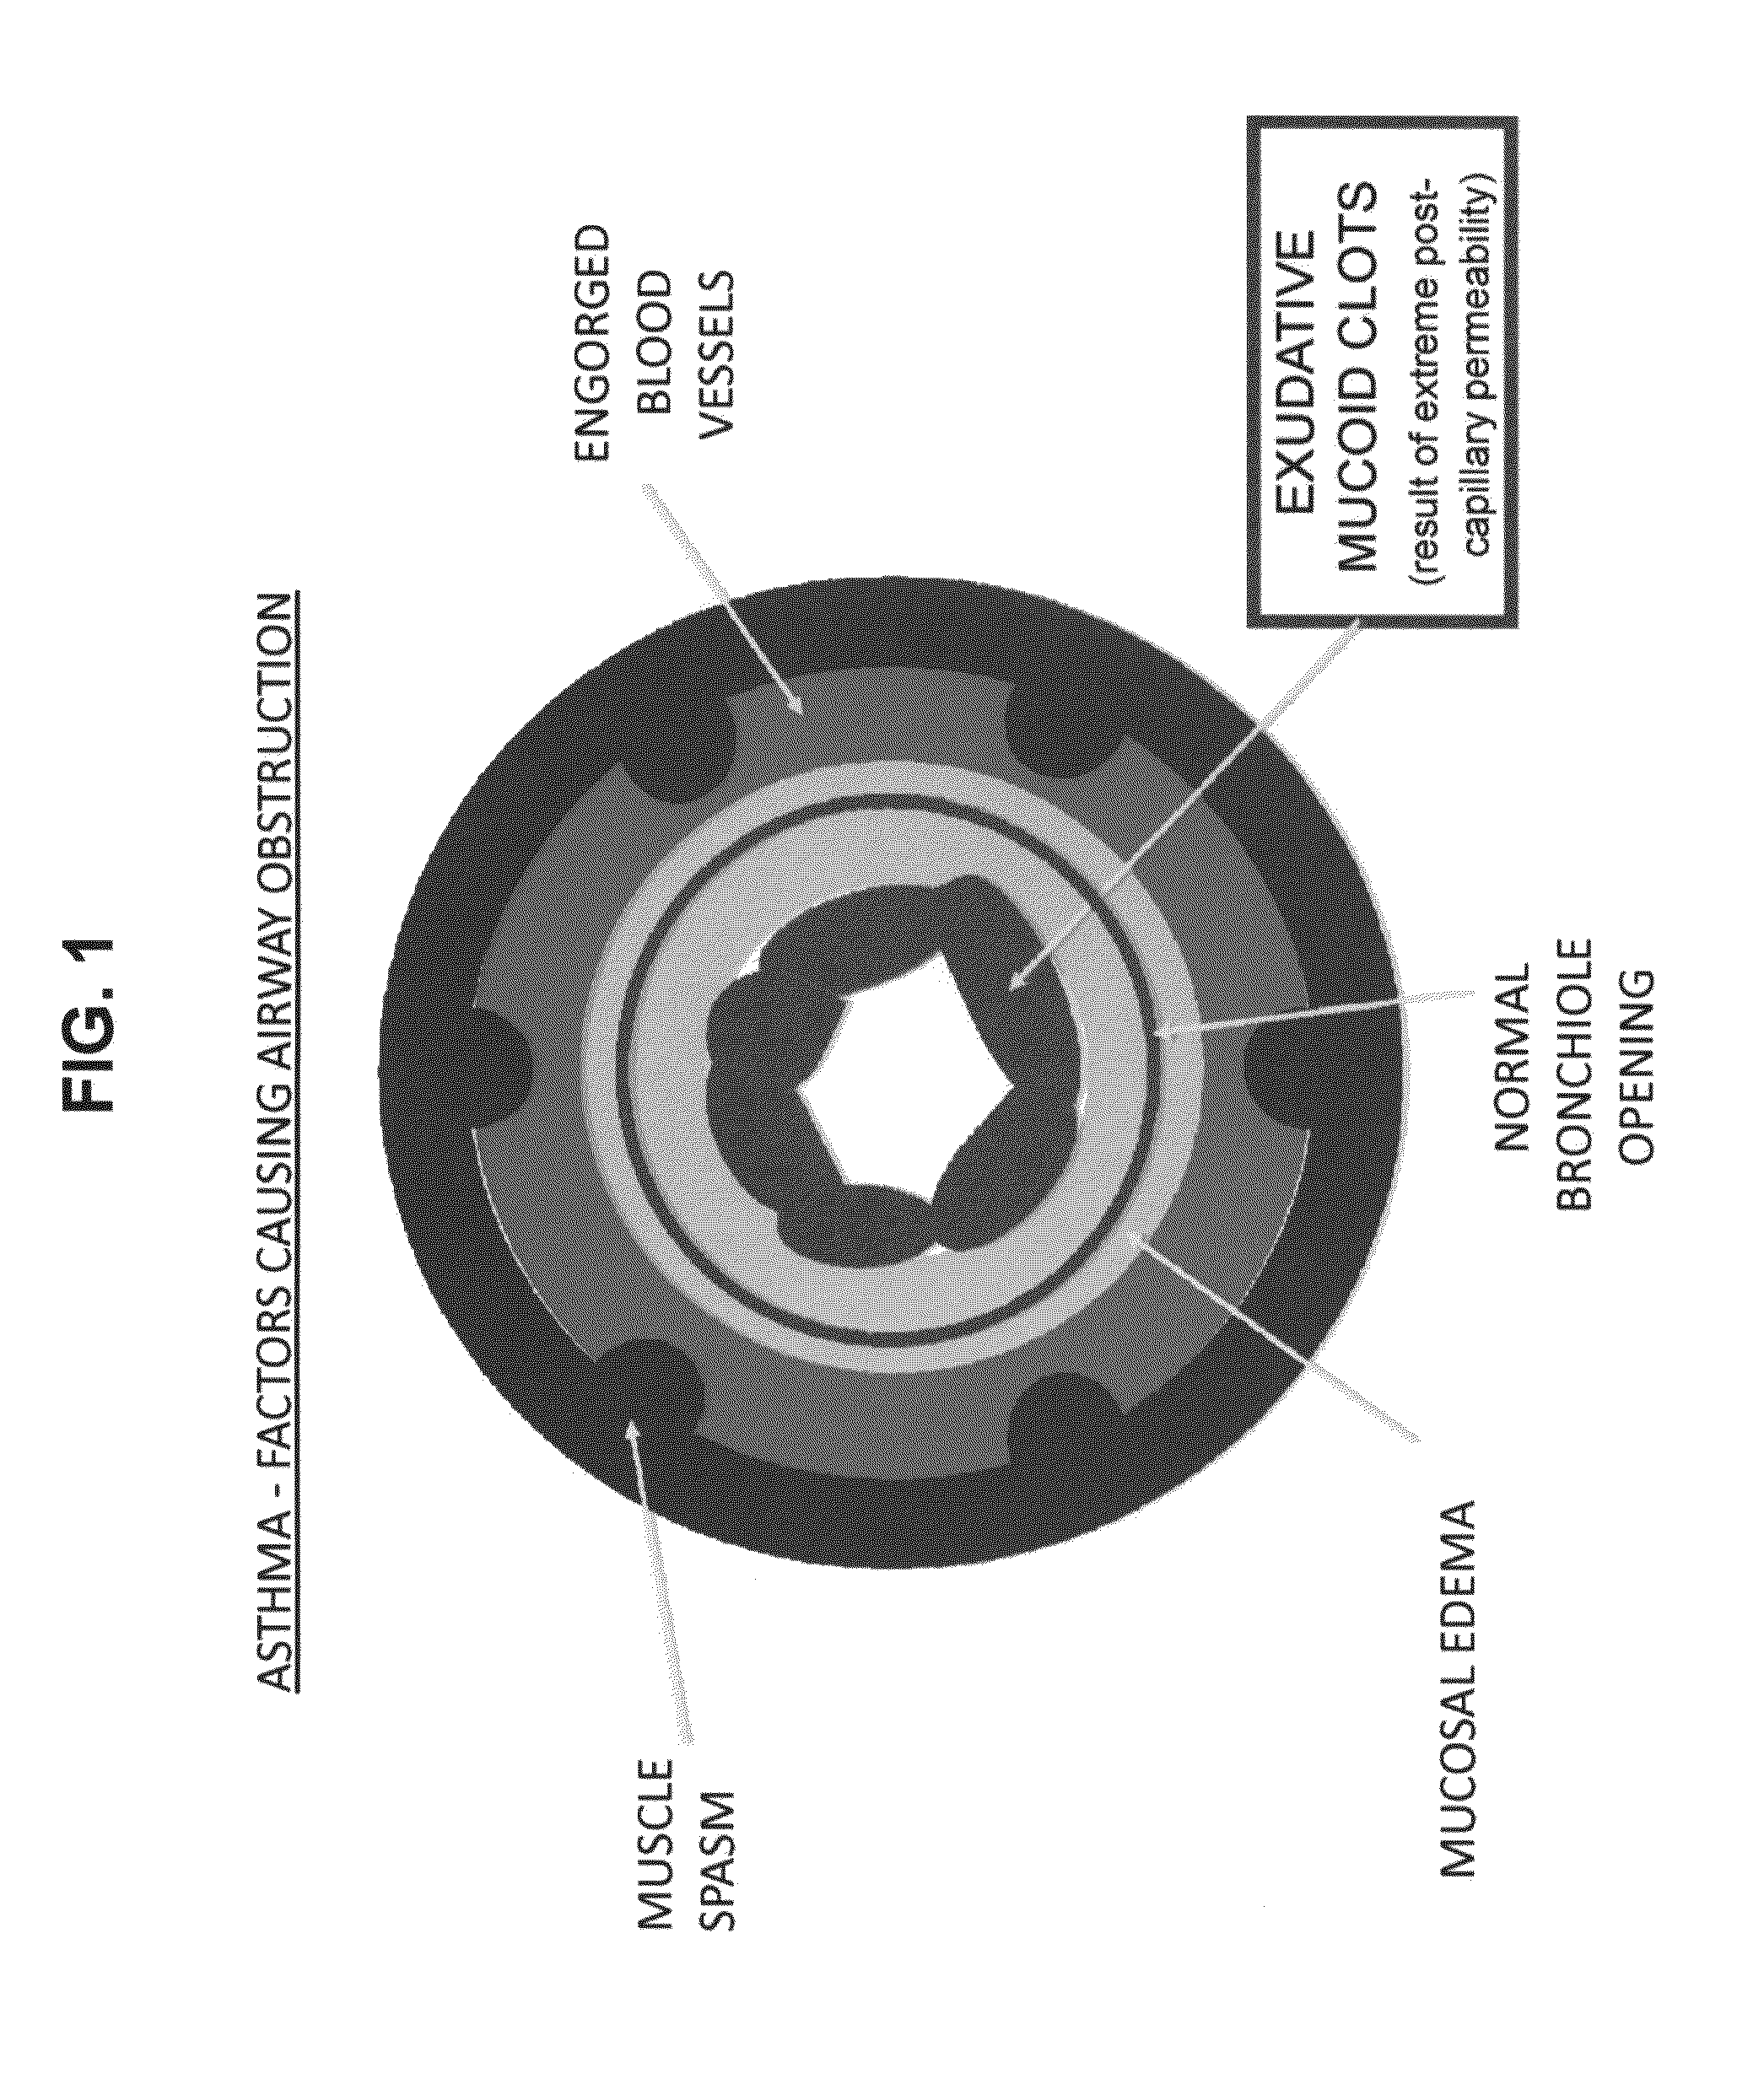 Compositions and methods for treatment of pulmonary diseases and conditions